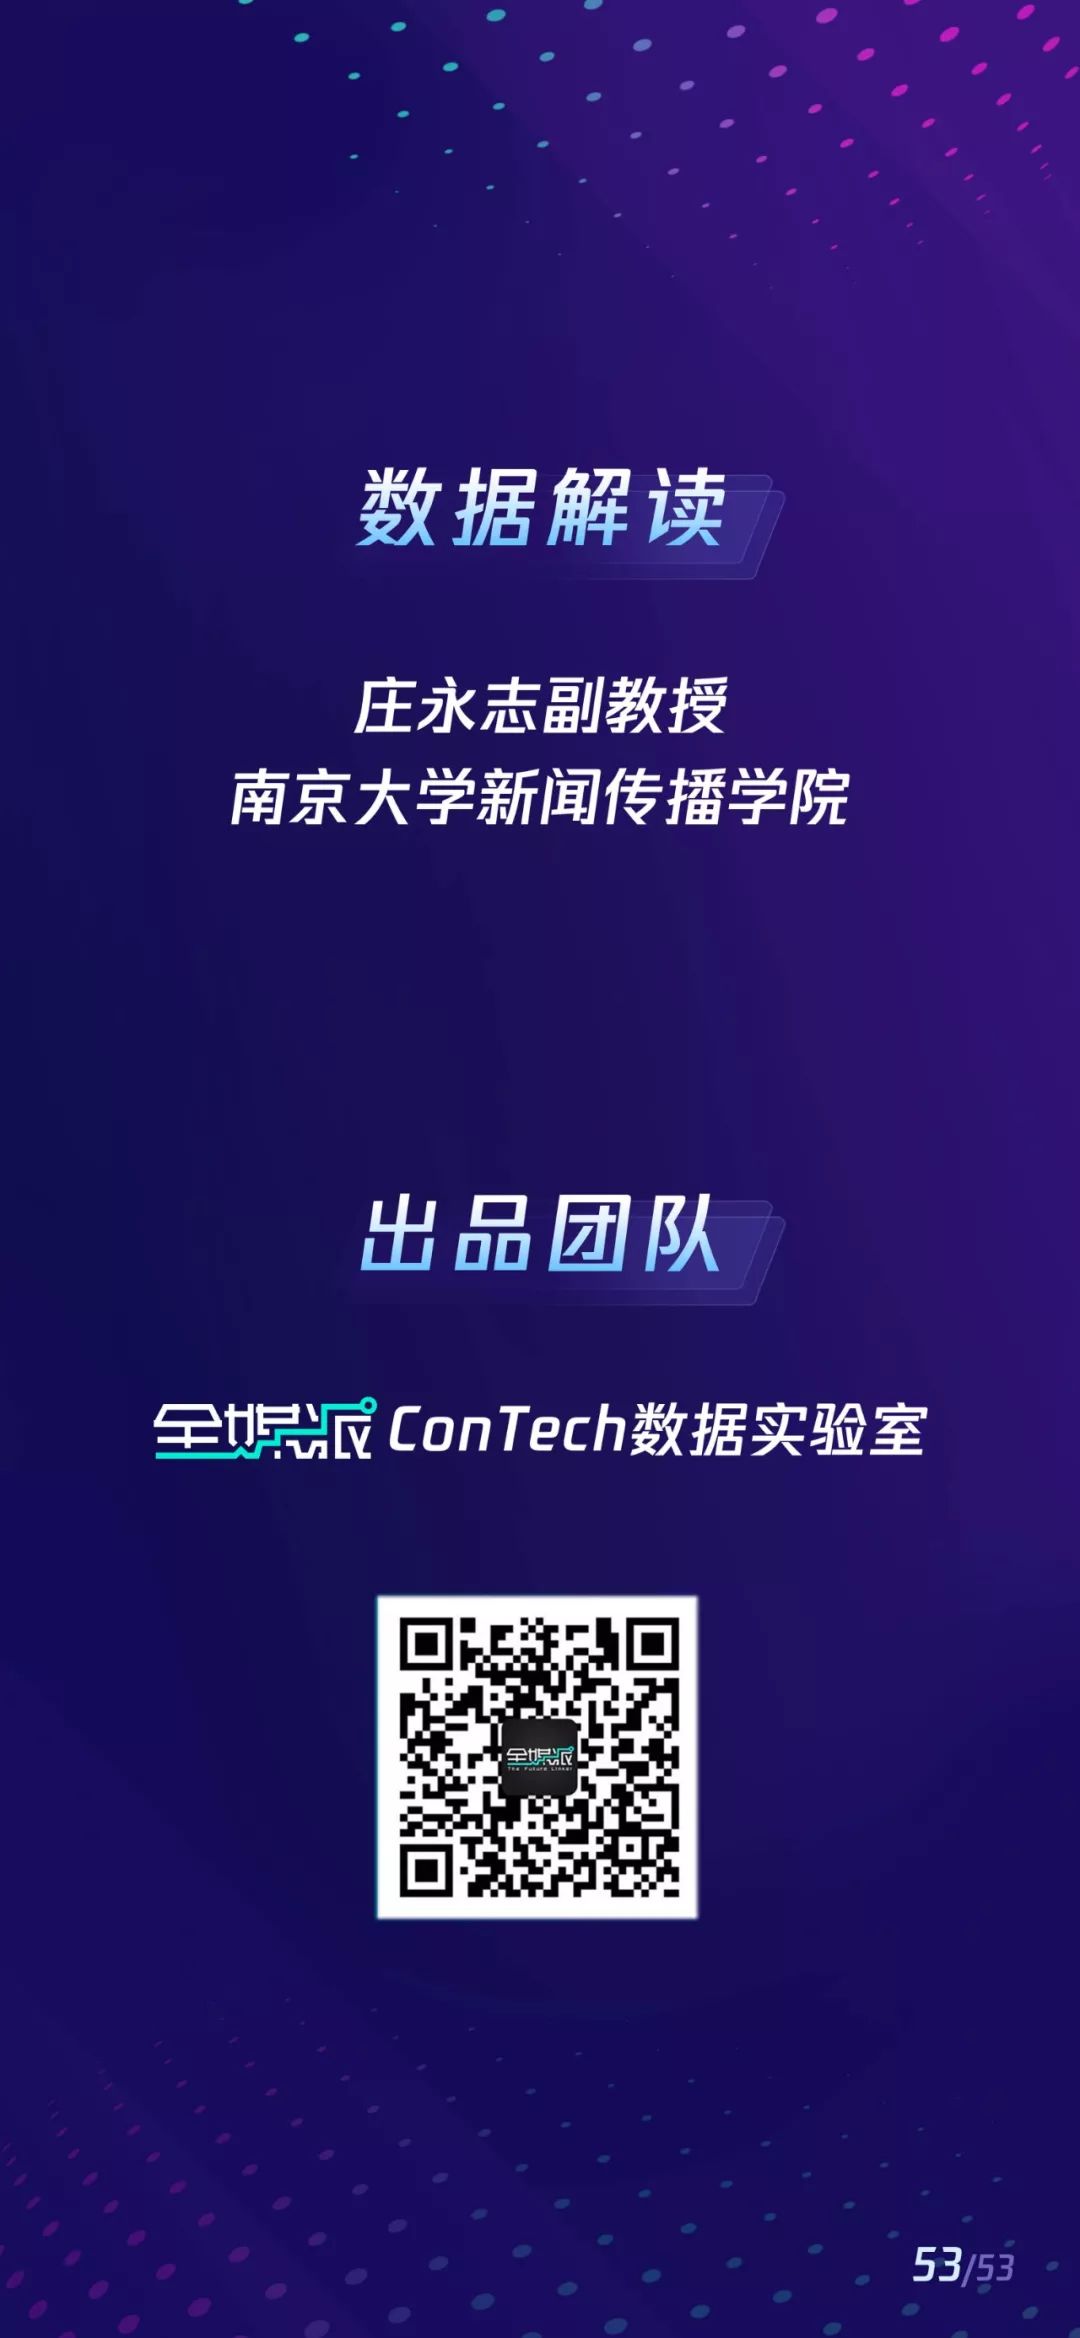 Tencent News ConTech Data Lab Releases 2019 Education New Ecological Content Dissemination Report